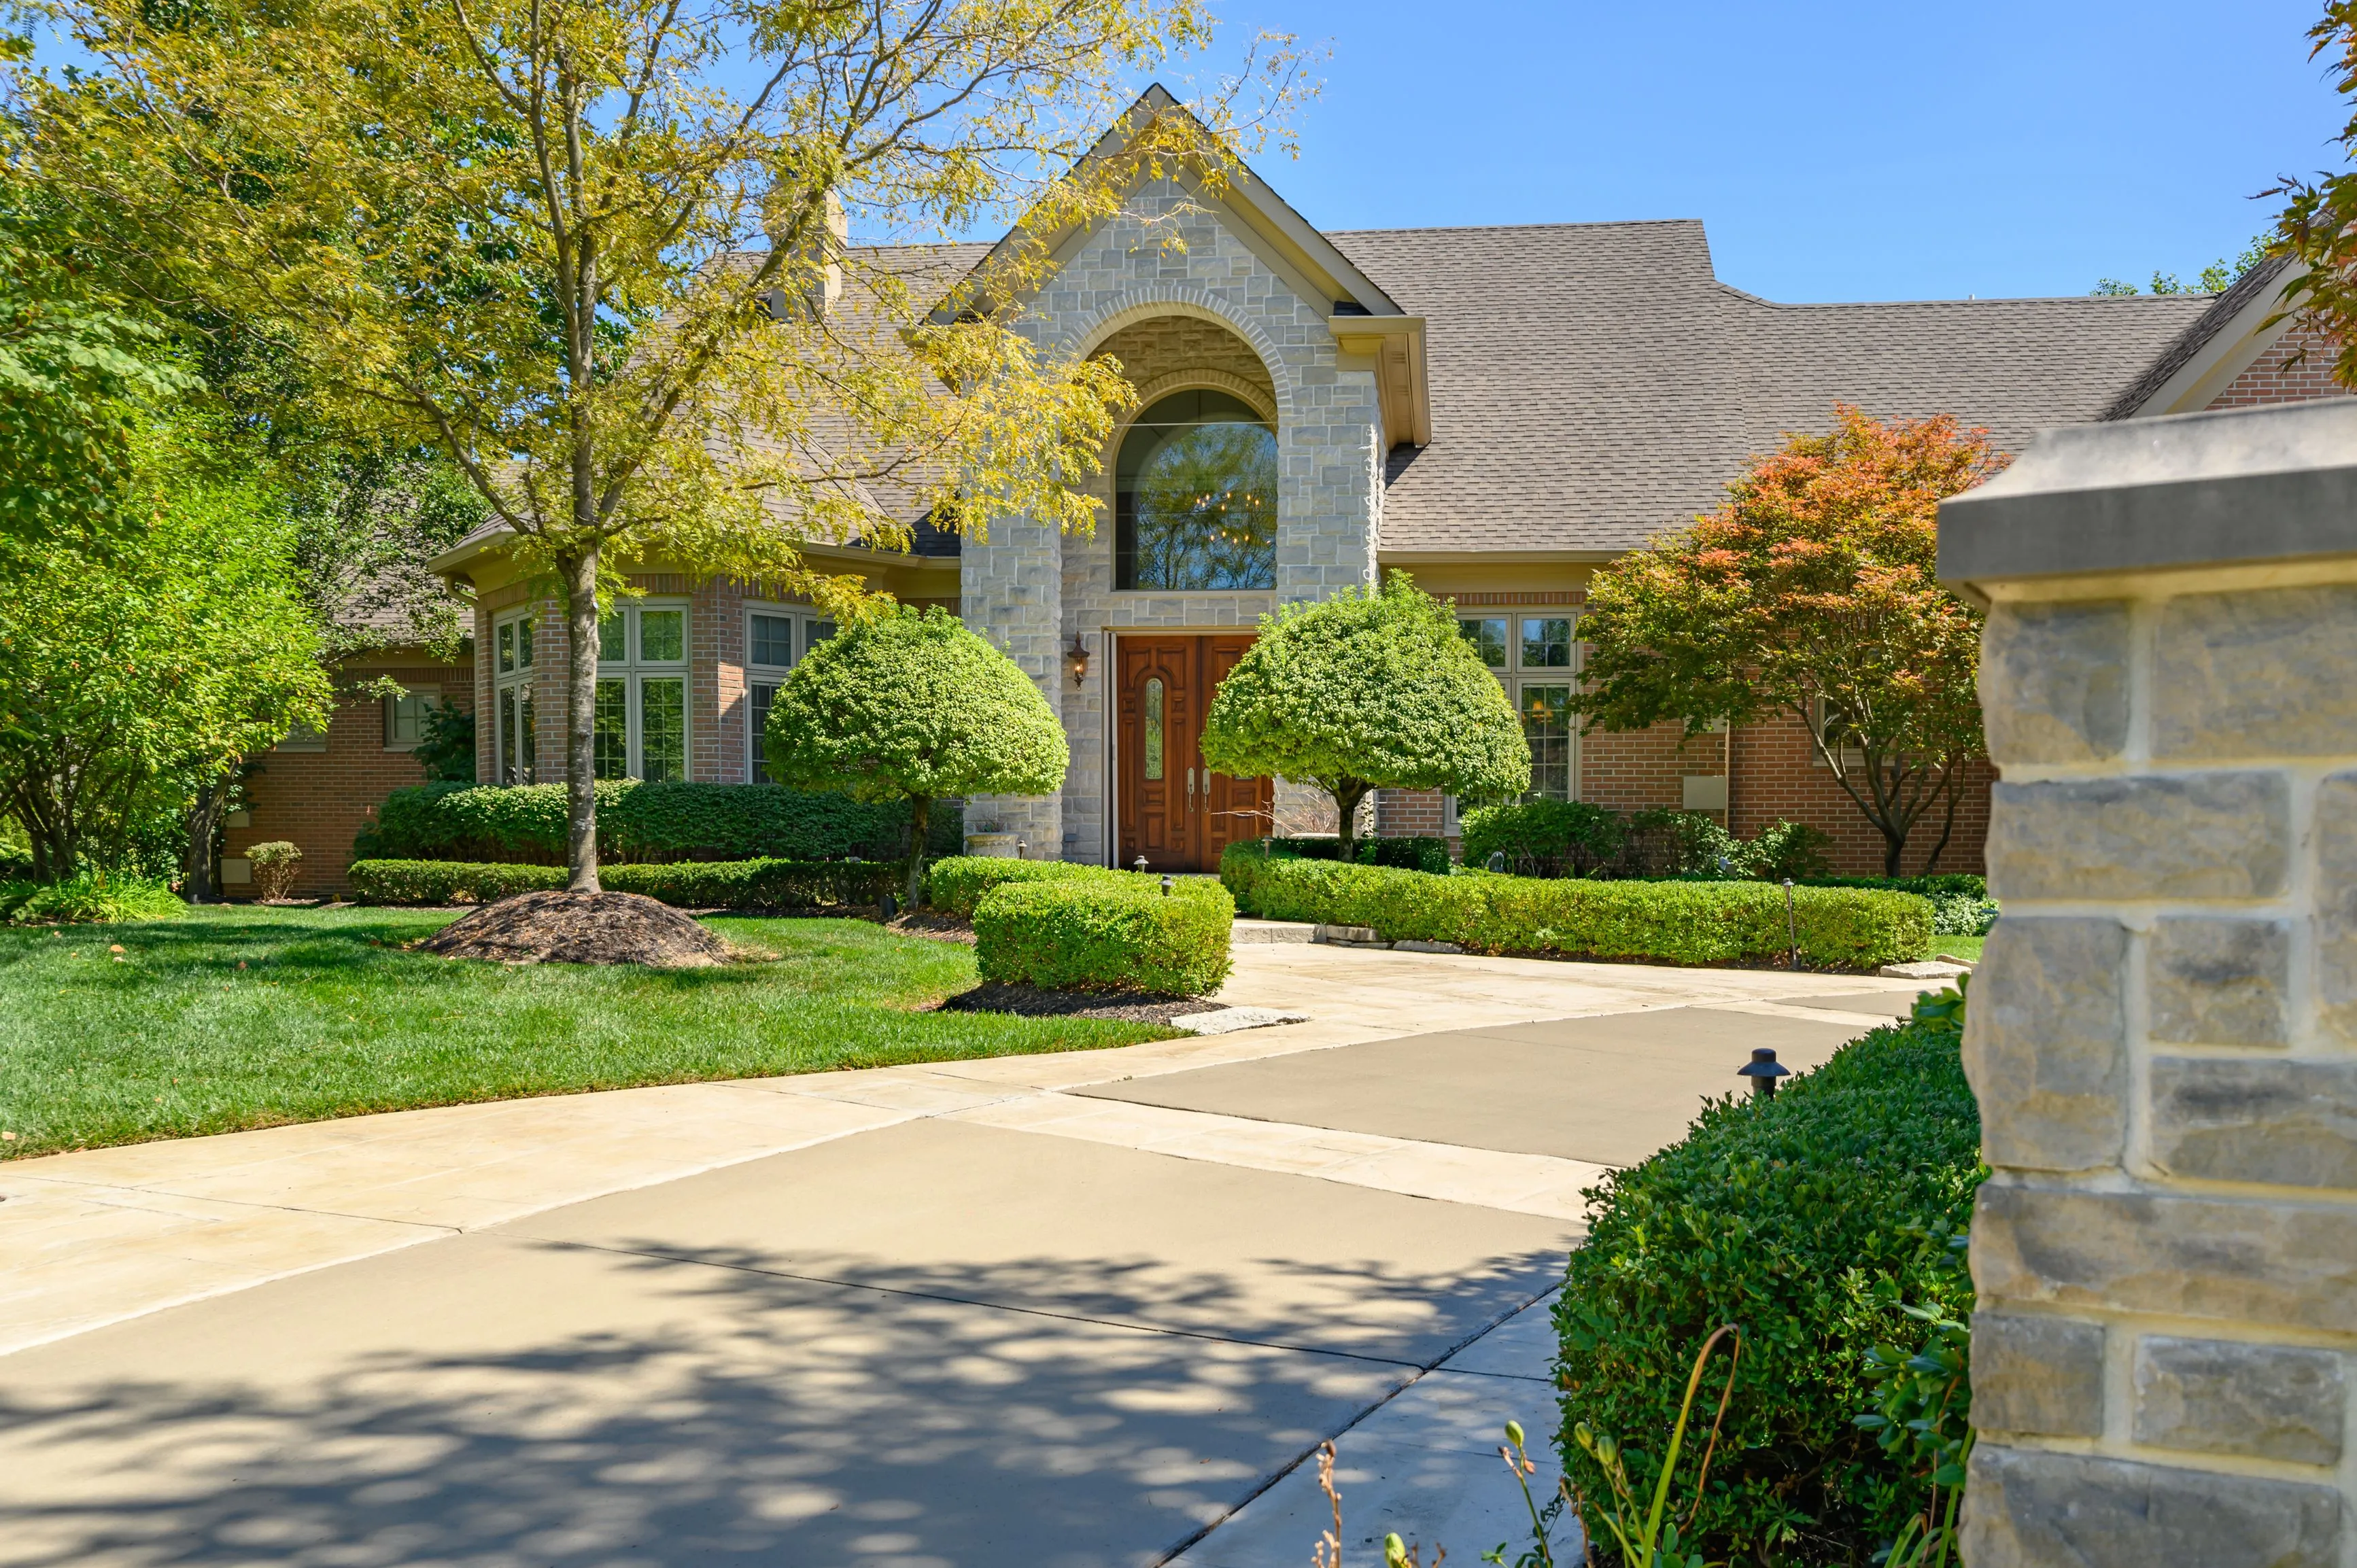 A beautiful suburban home with a landscaped front yard, featuring a stone arched entryway, pruned shrubs, and a well-maintained lawn under a blue sky.